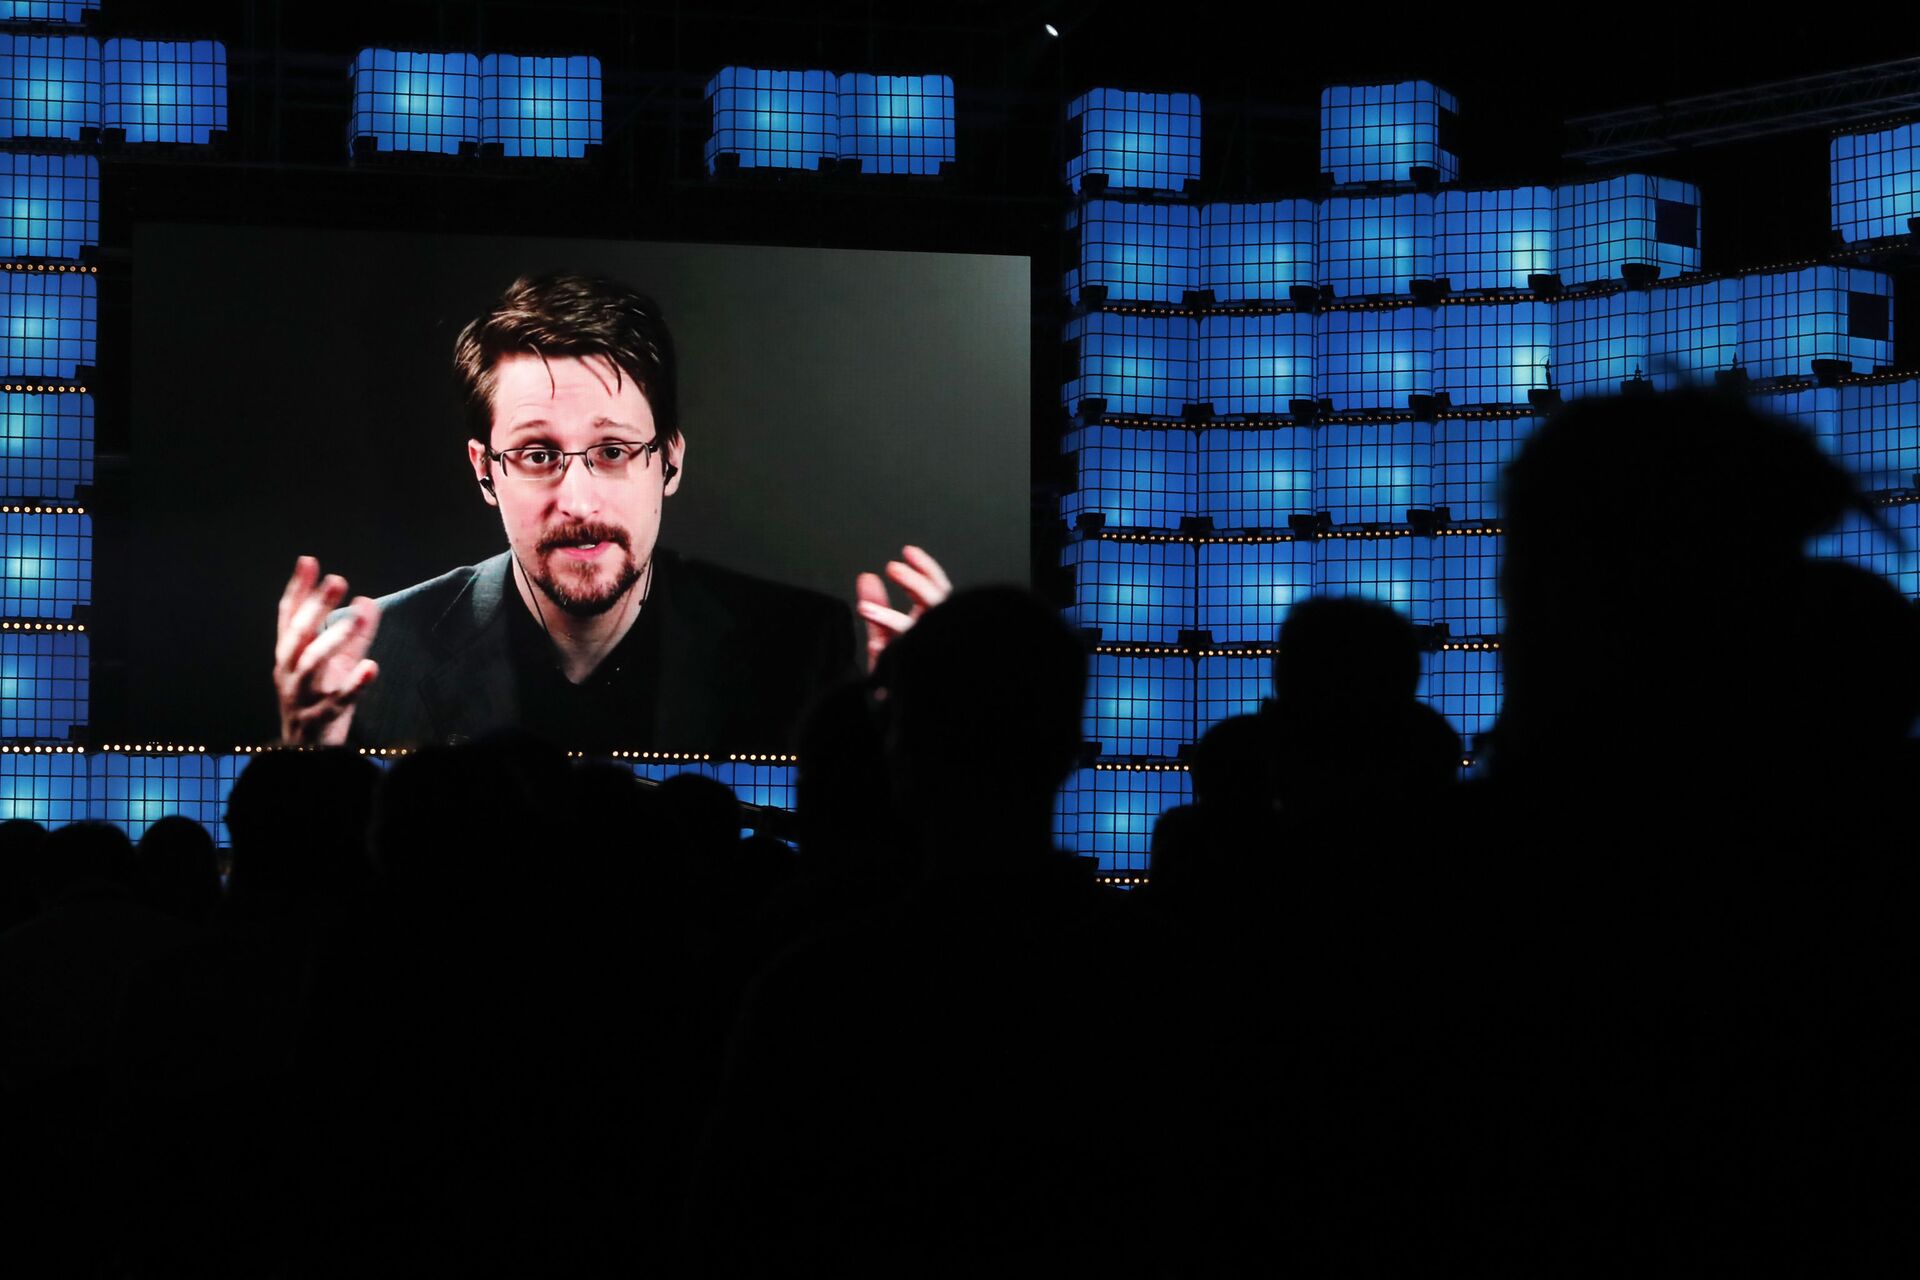 Former U.S. National Security Agency contractor Edward Snowden addresses attendees through video link at the Web Summit technology conference in Lisbon, Monday, Nov. 4, 2019 - Sputnik International, 1920, 24.02.2023